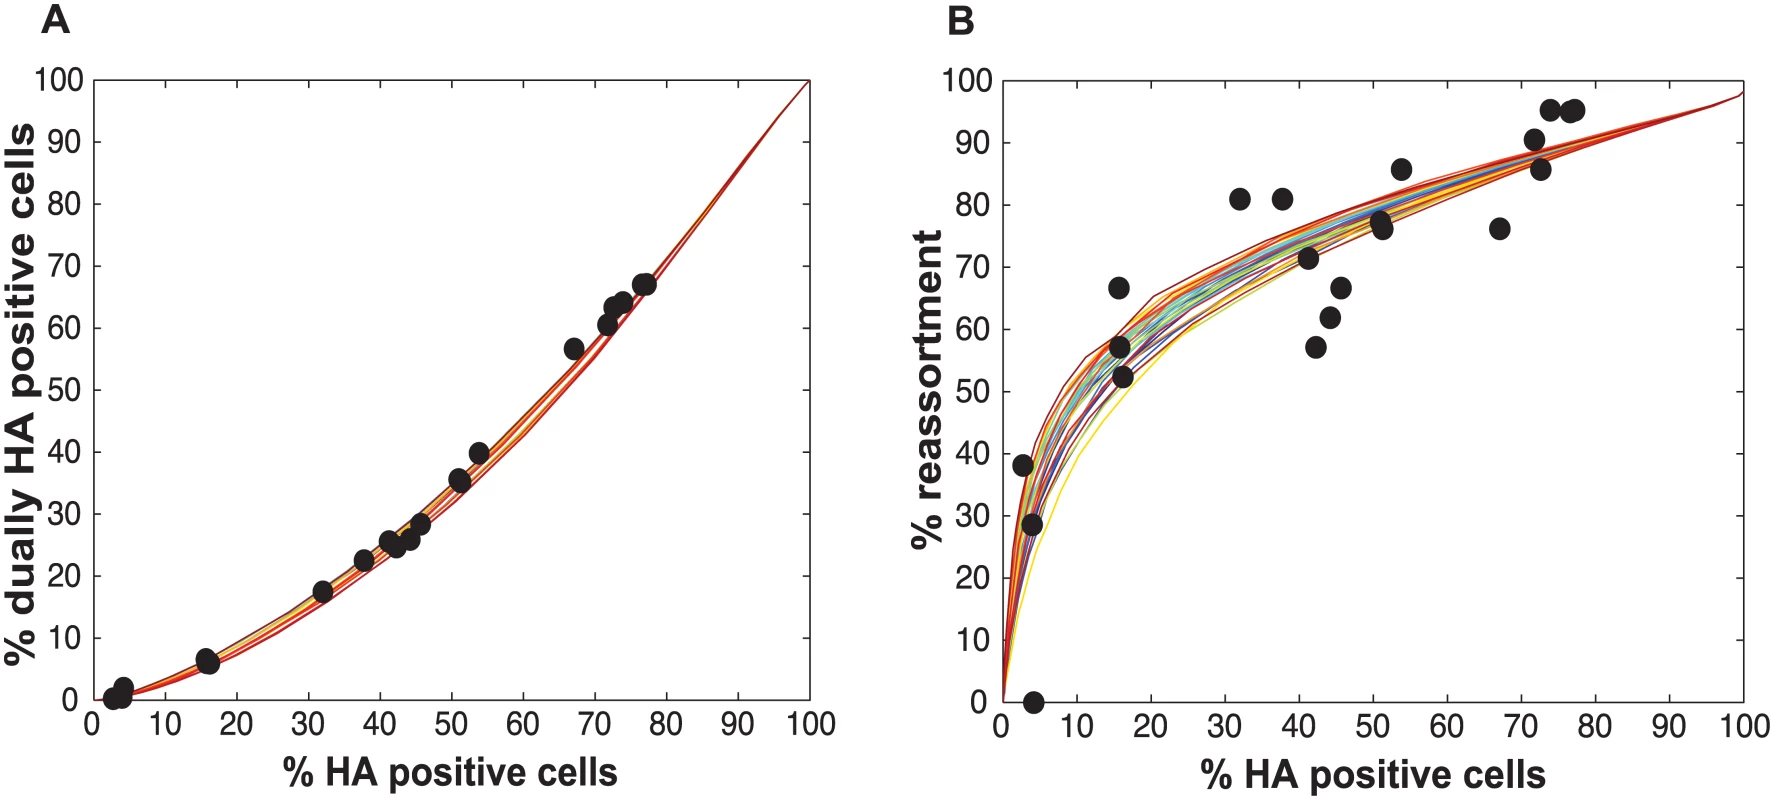 Varying P<sub>P</sub> by segment yields good fit between modeled and observed relationships among HA positive cells, dually HA positive cells and reassortment.